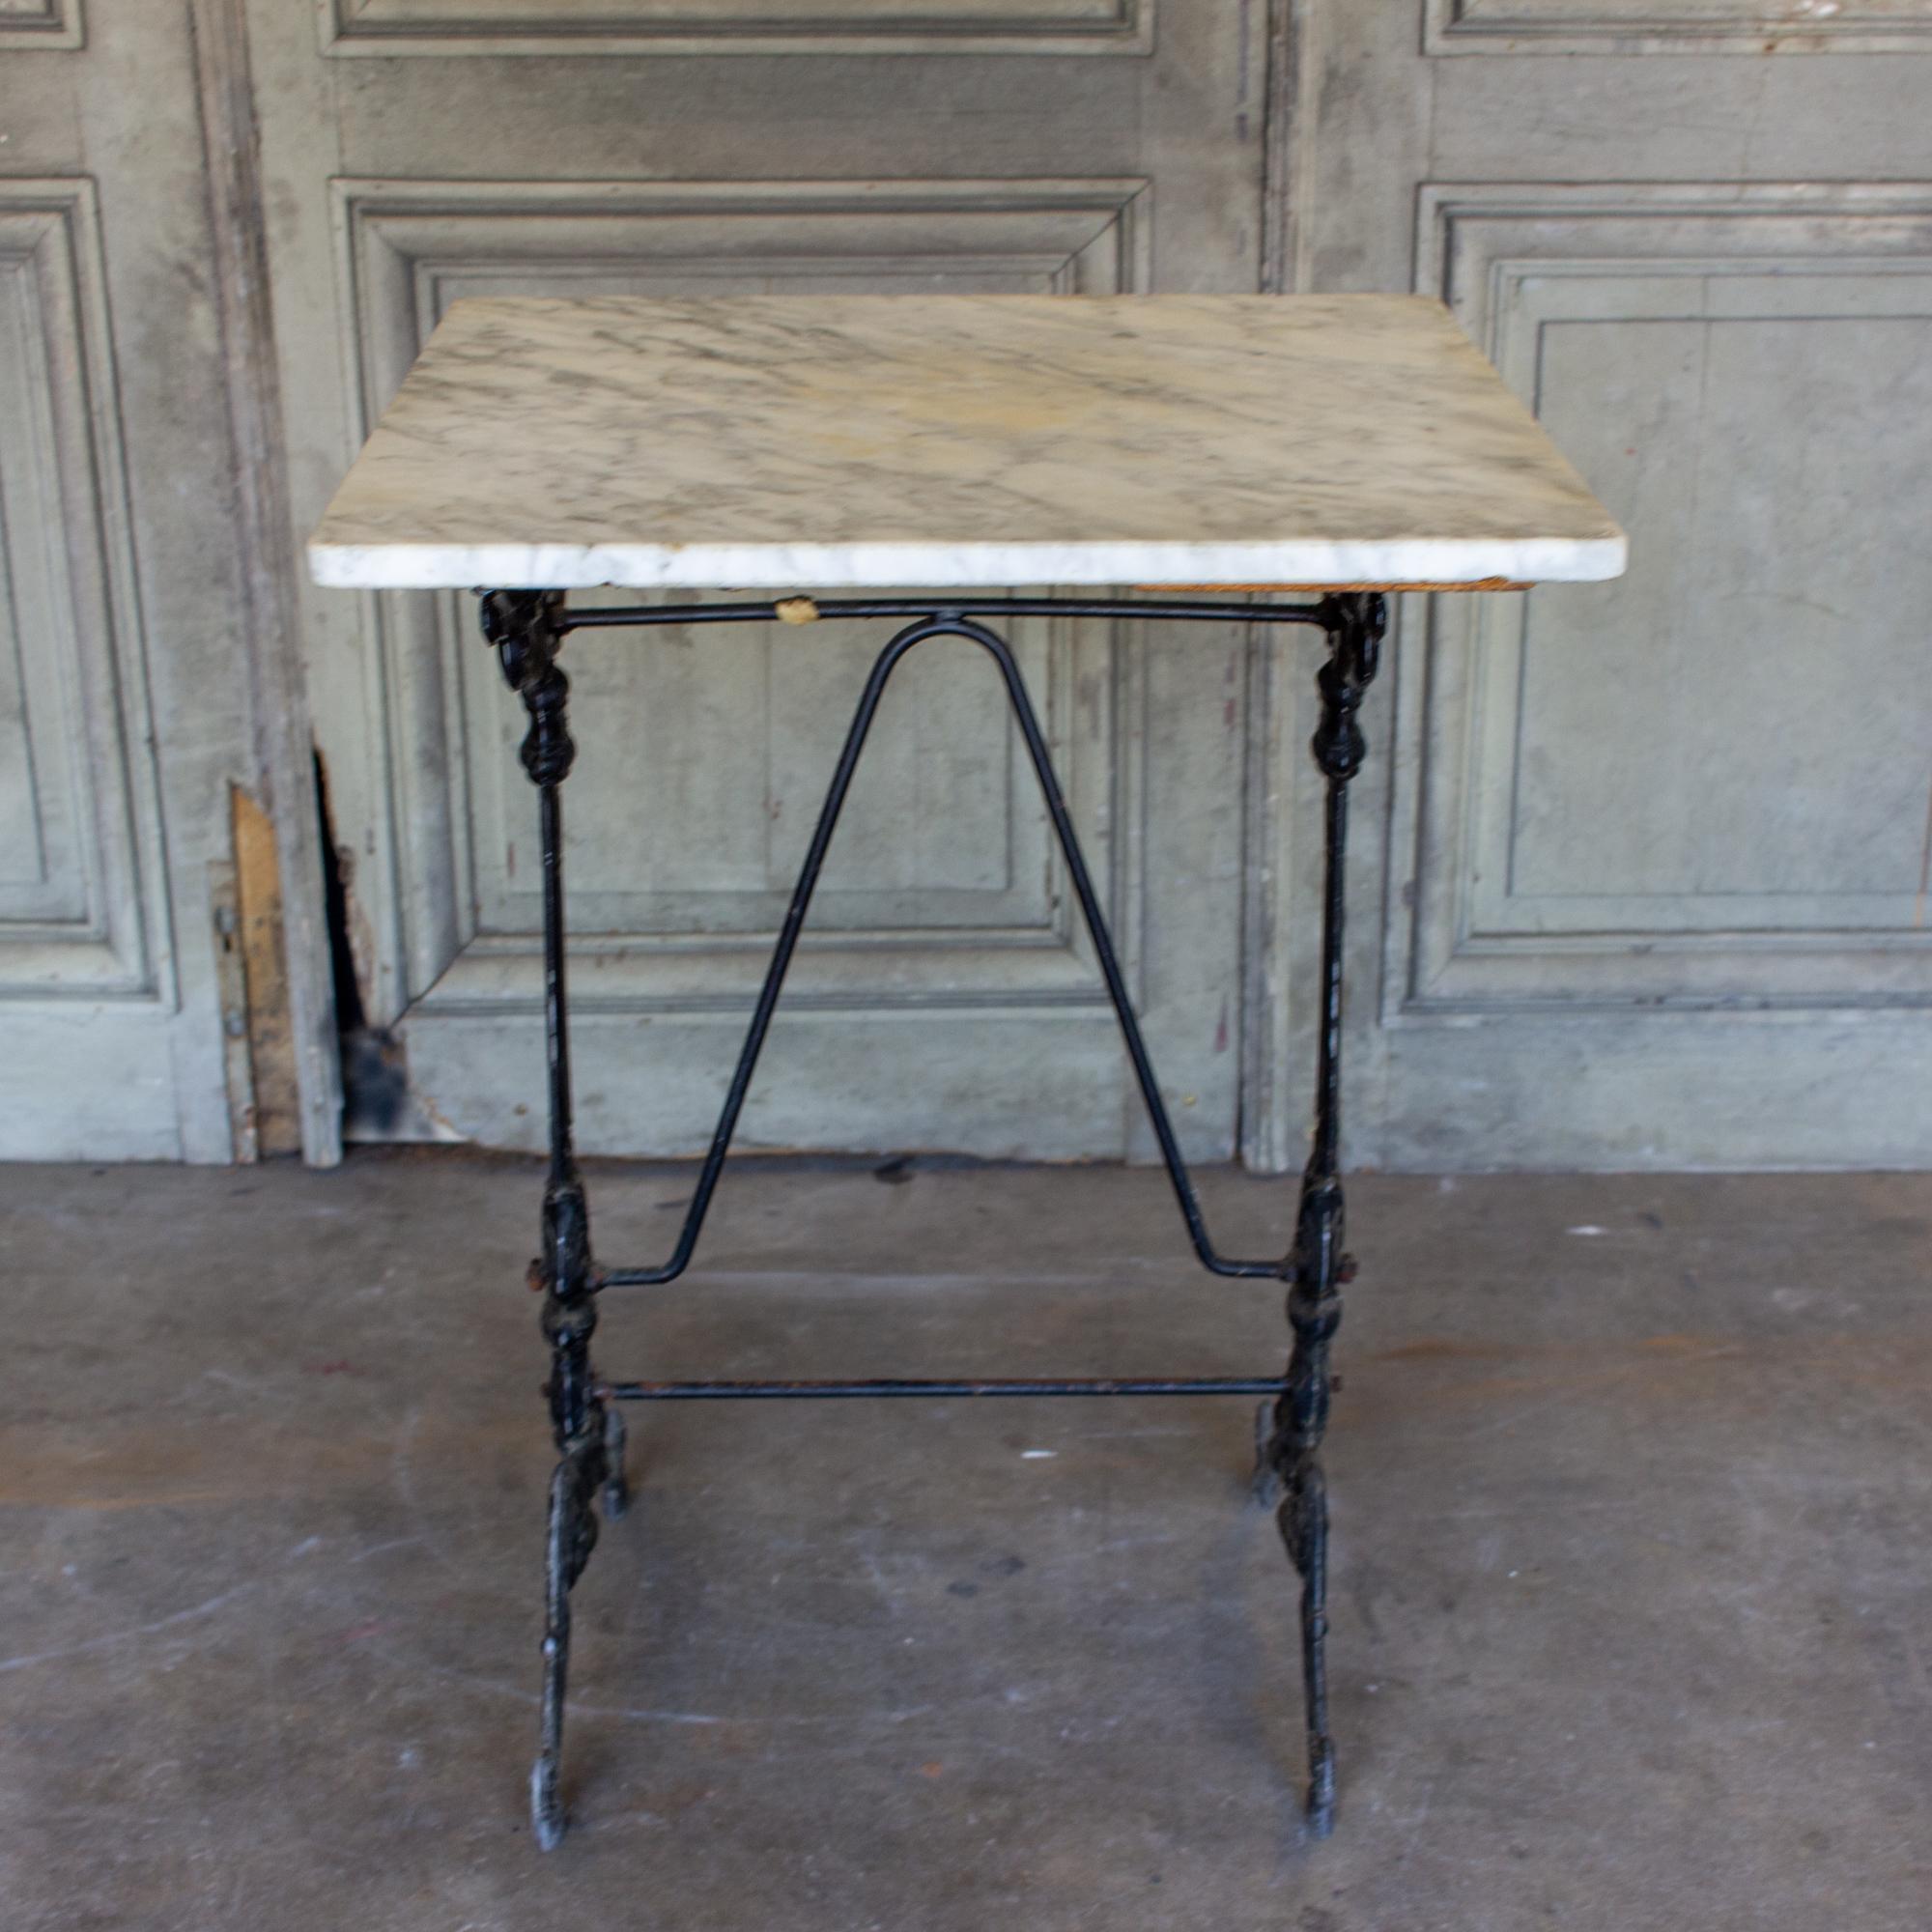 This beautifully decorated bistro table features an iron base with wonderful details and a square-shaped white marble top with rounded corners. The base has scrollwork, floral details and scroll feet. The marble is primarily white with dark gray